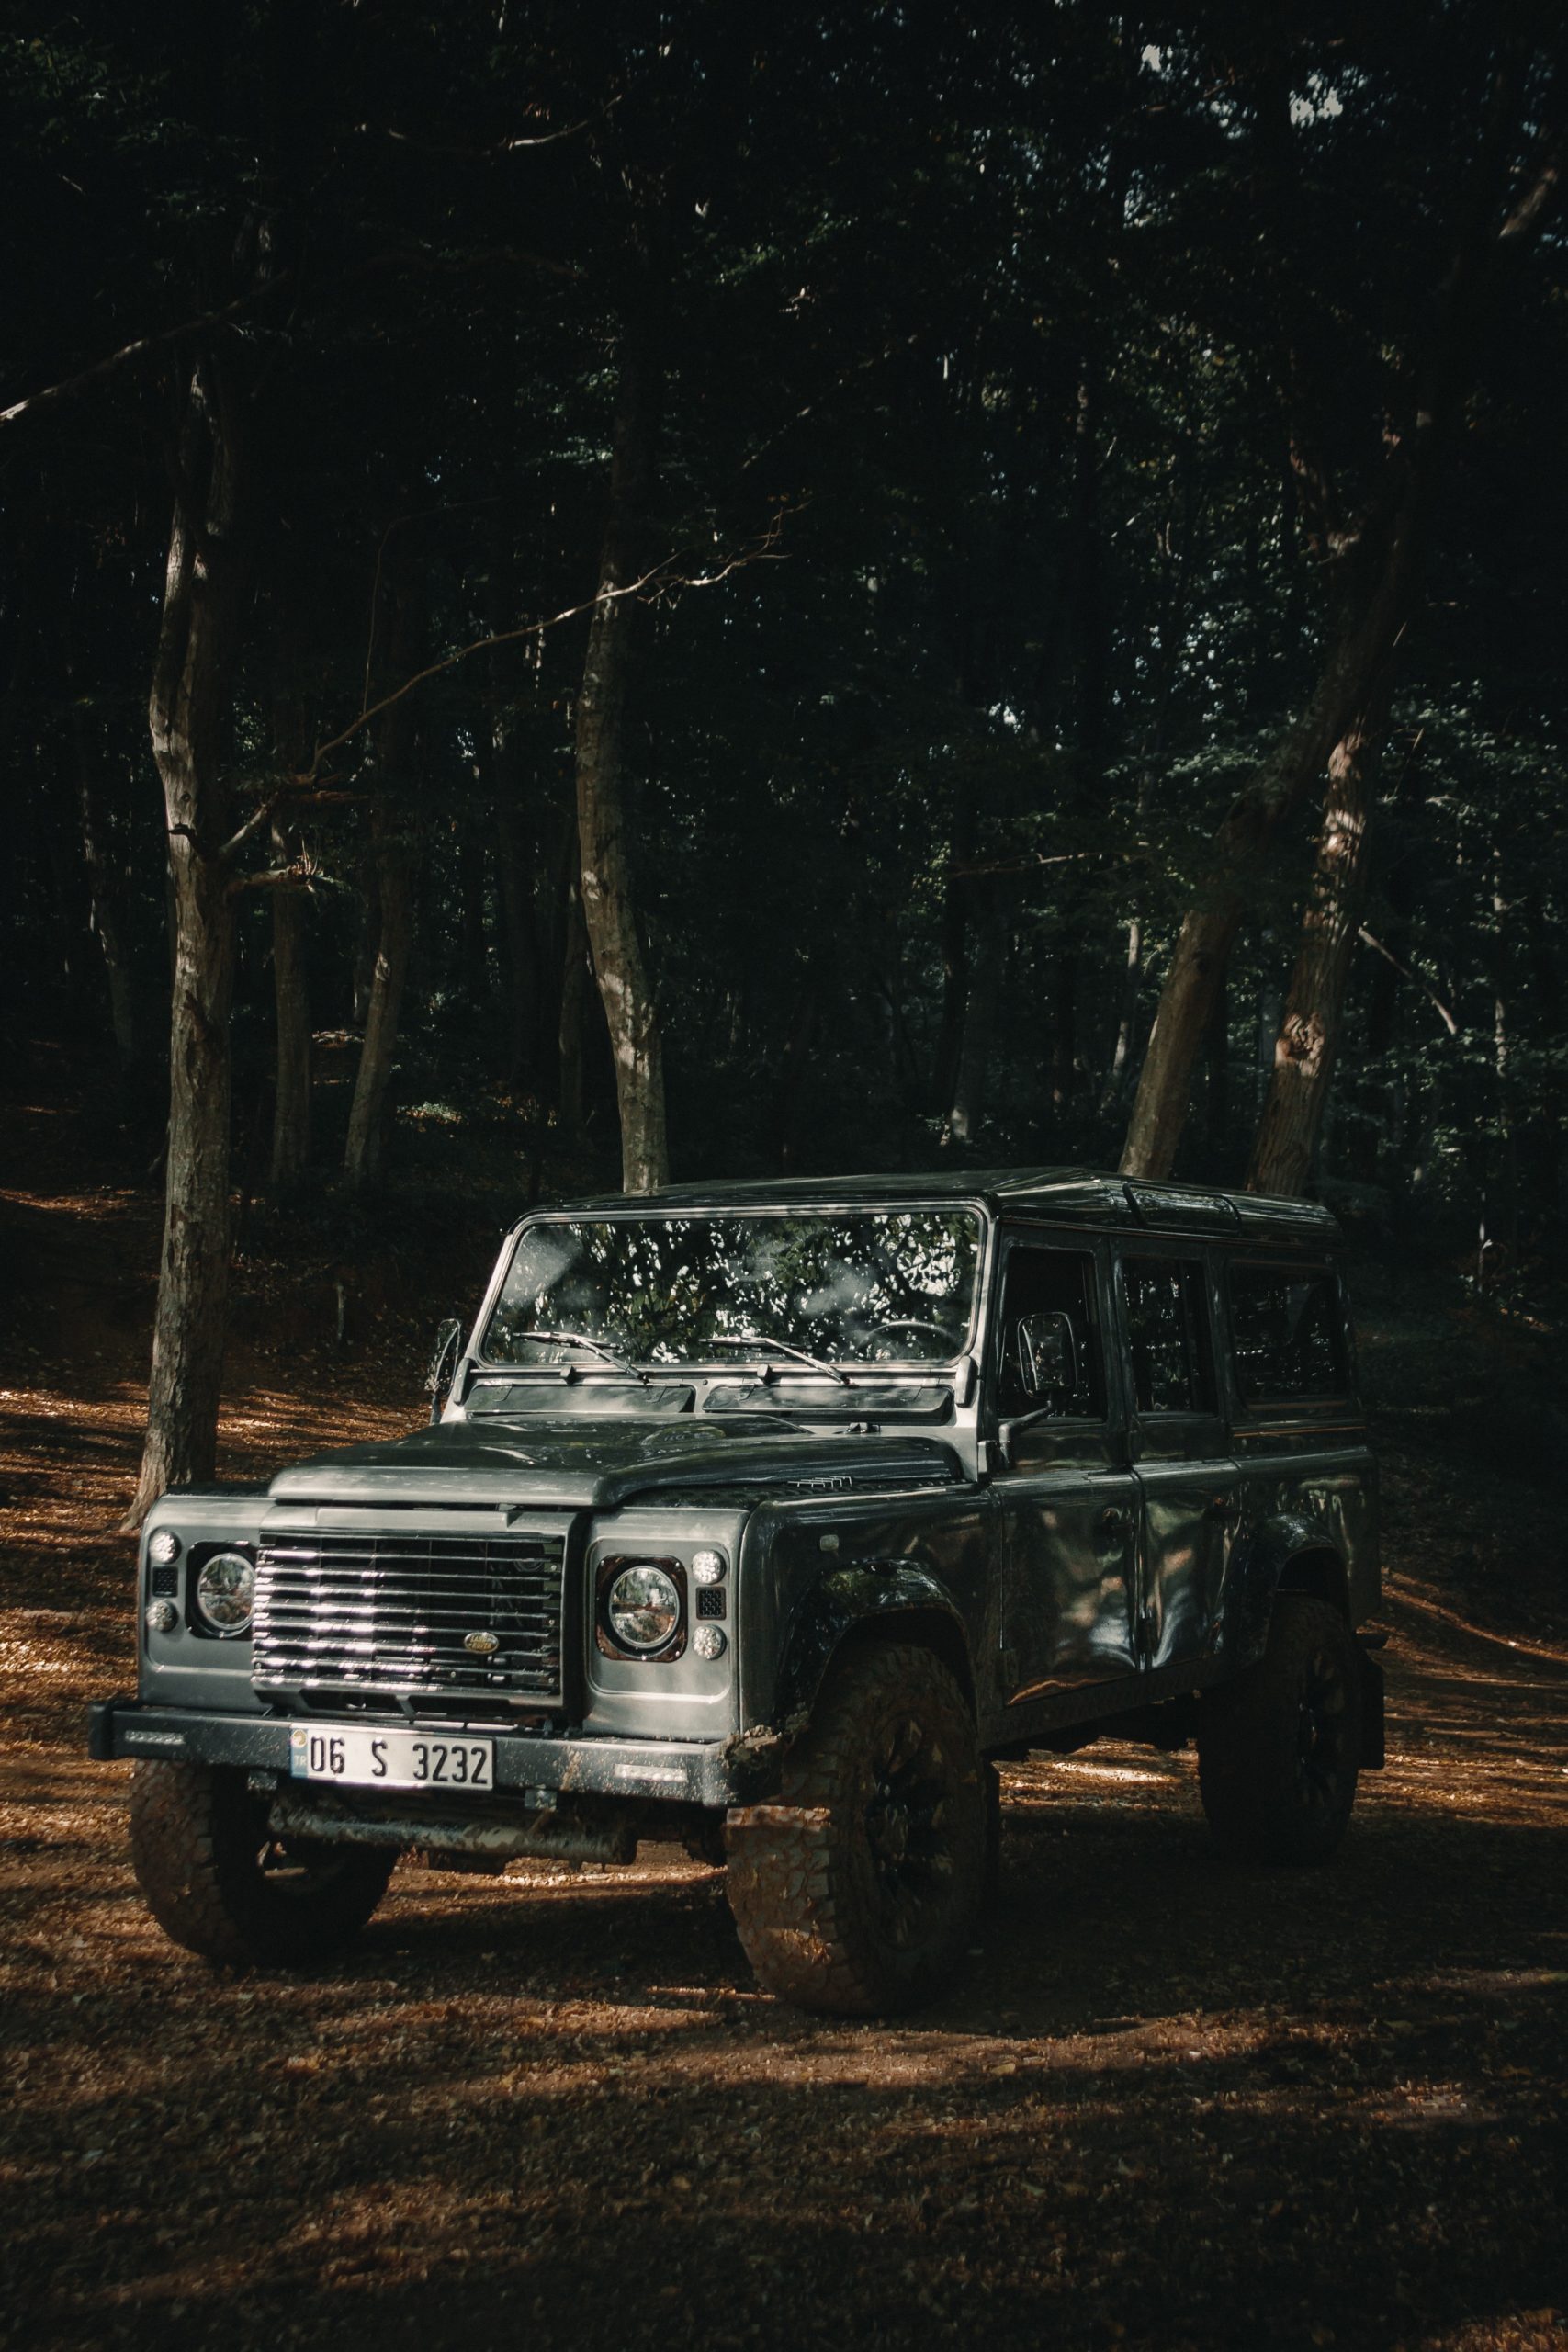 All about the Land Rover Defender